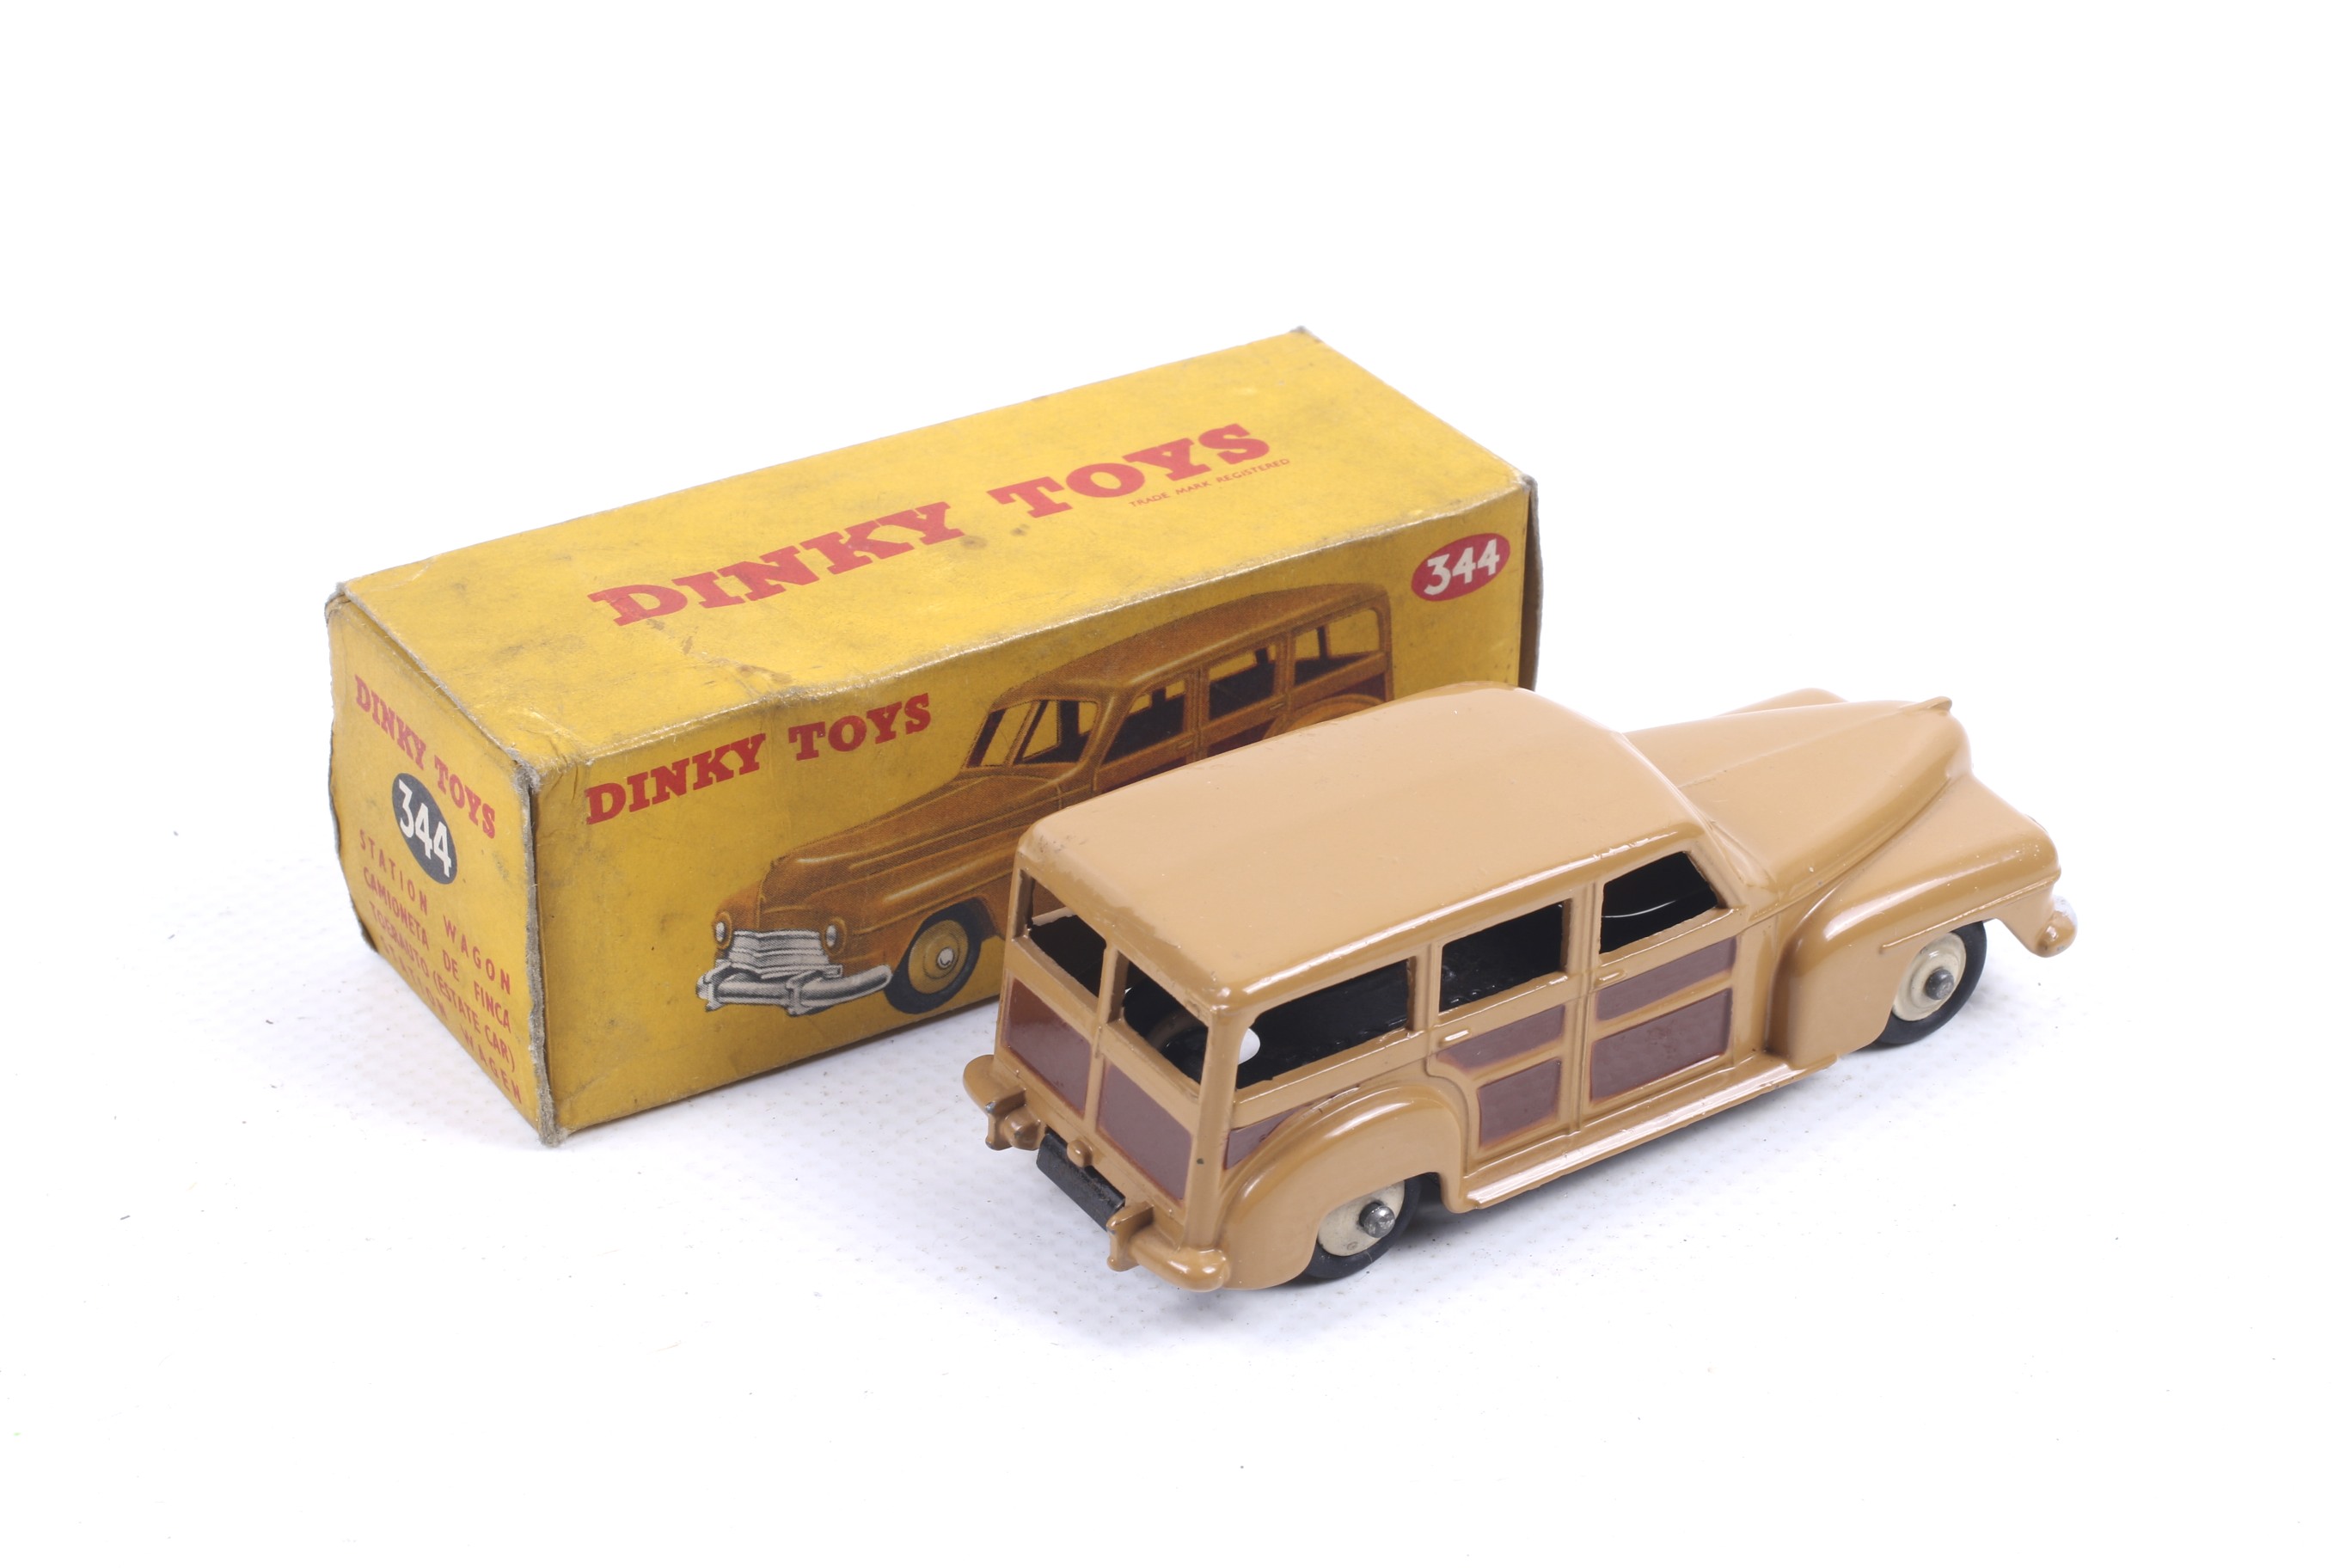 A Dinky diecast Estate Car. No. 344, with a tan and brown body with white wheels, in original box. - Image 2 of 2